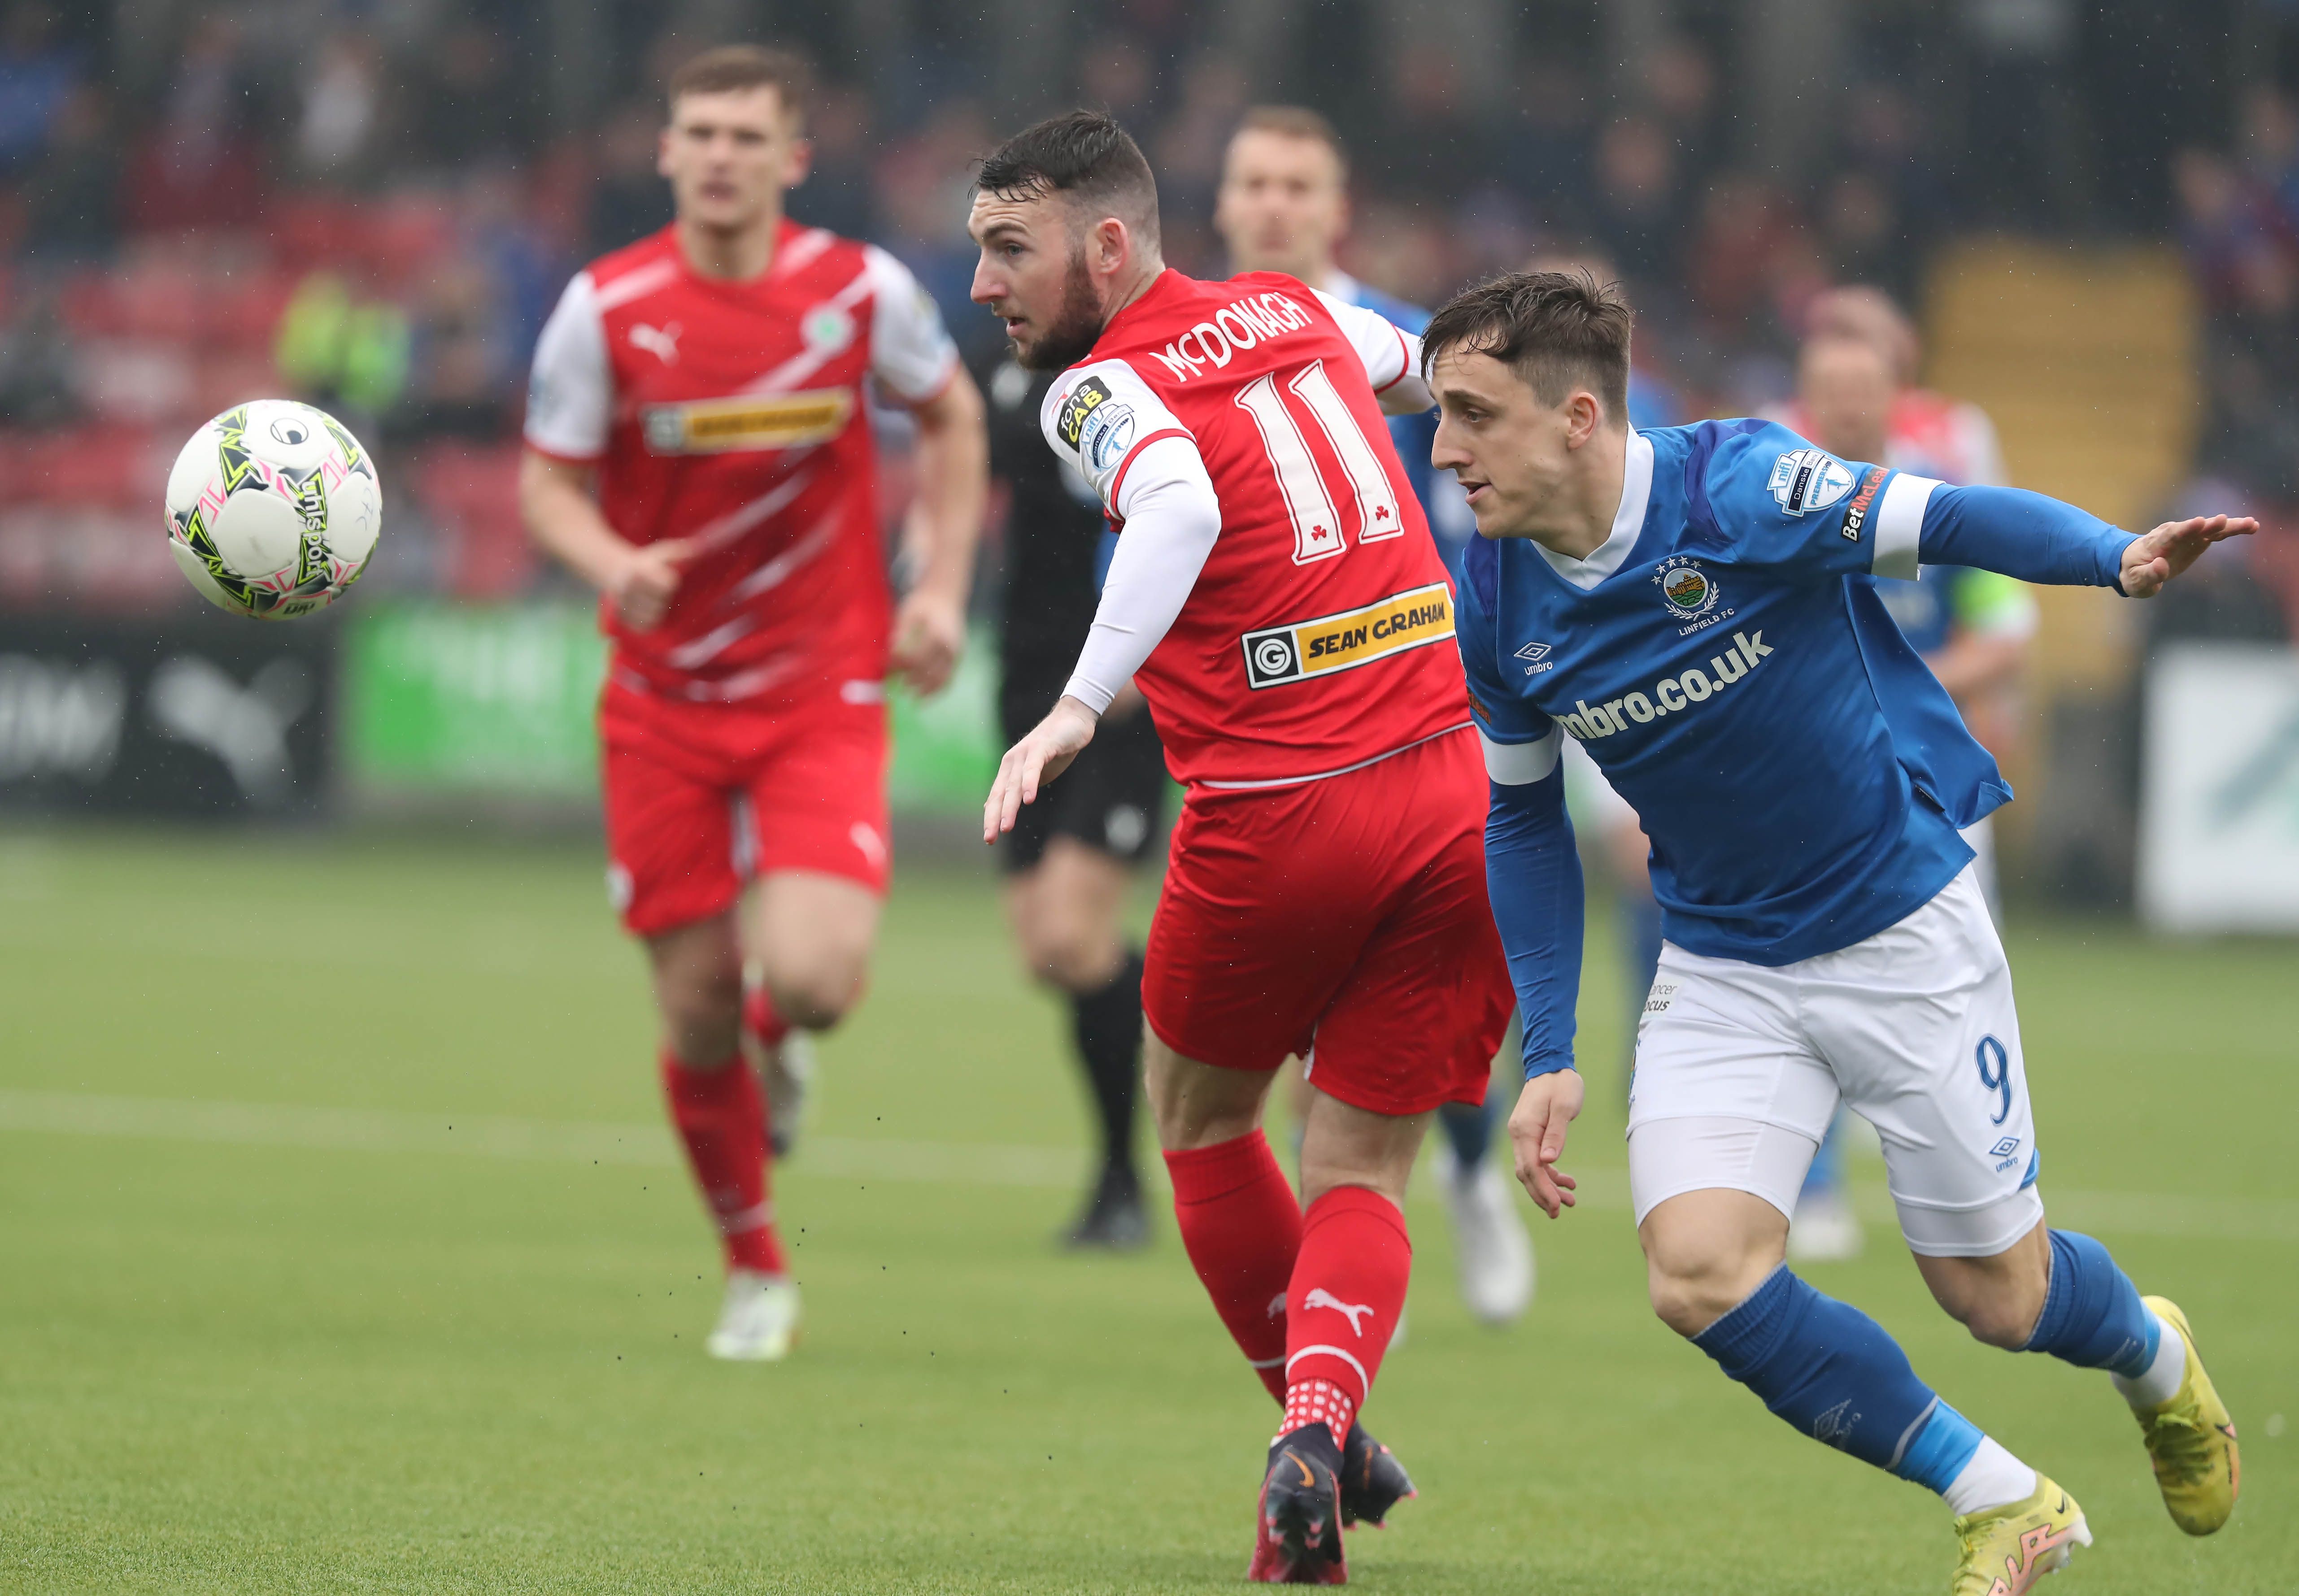 Cliftonville lost 2-0 to Linfield on Saturday